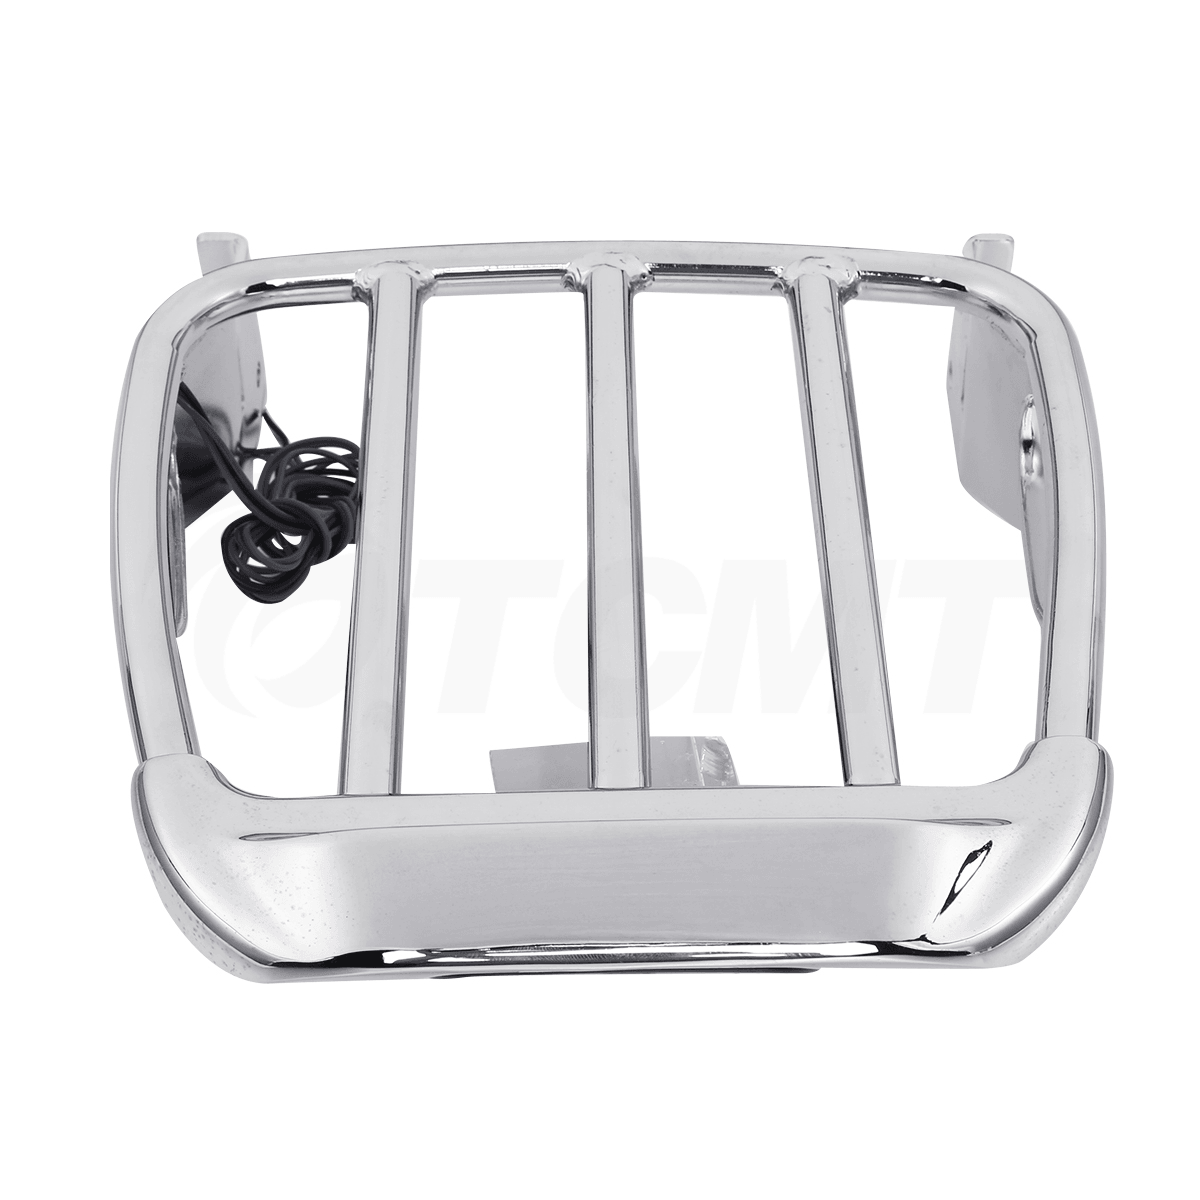 Iron Two-Up Luggage Rack W/ LED Light Fit For Harley Heritage Softail Classic - Moto Life Products